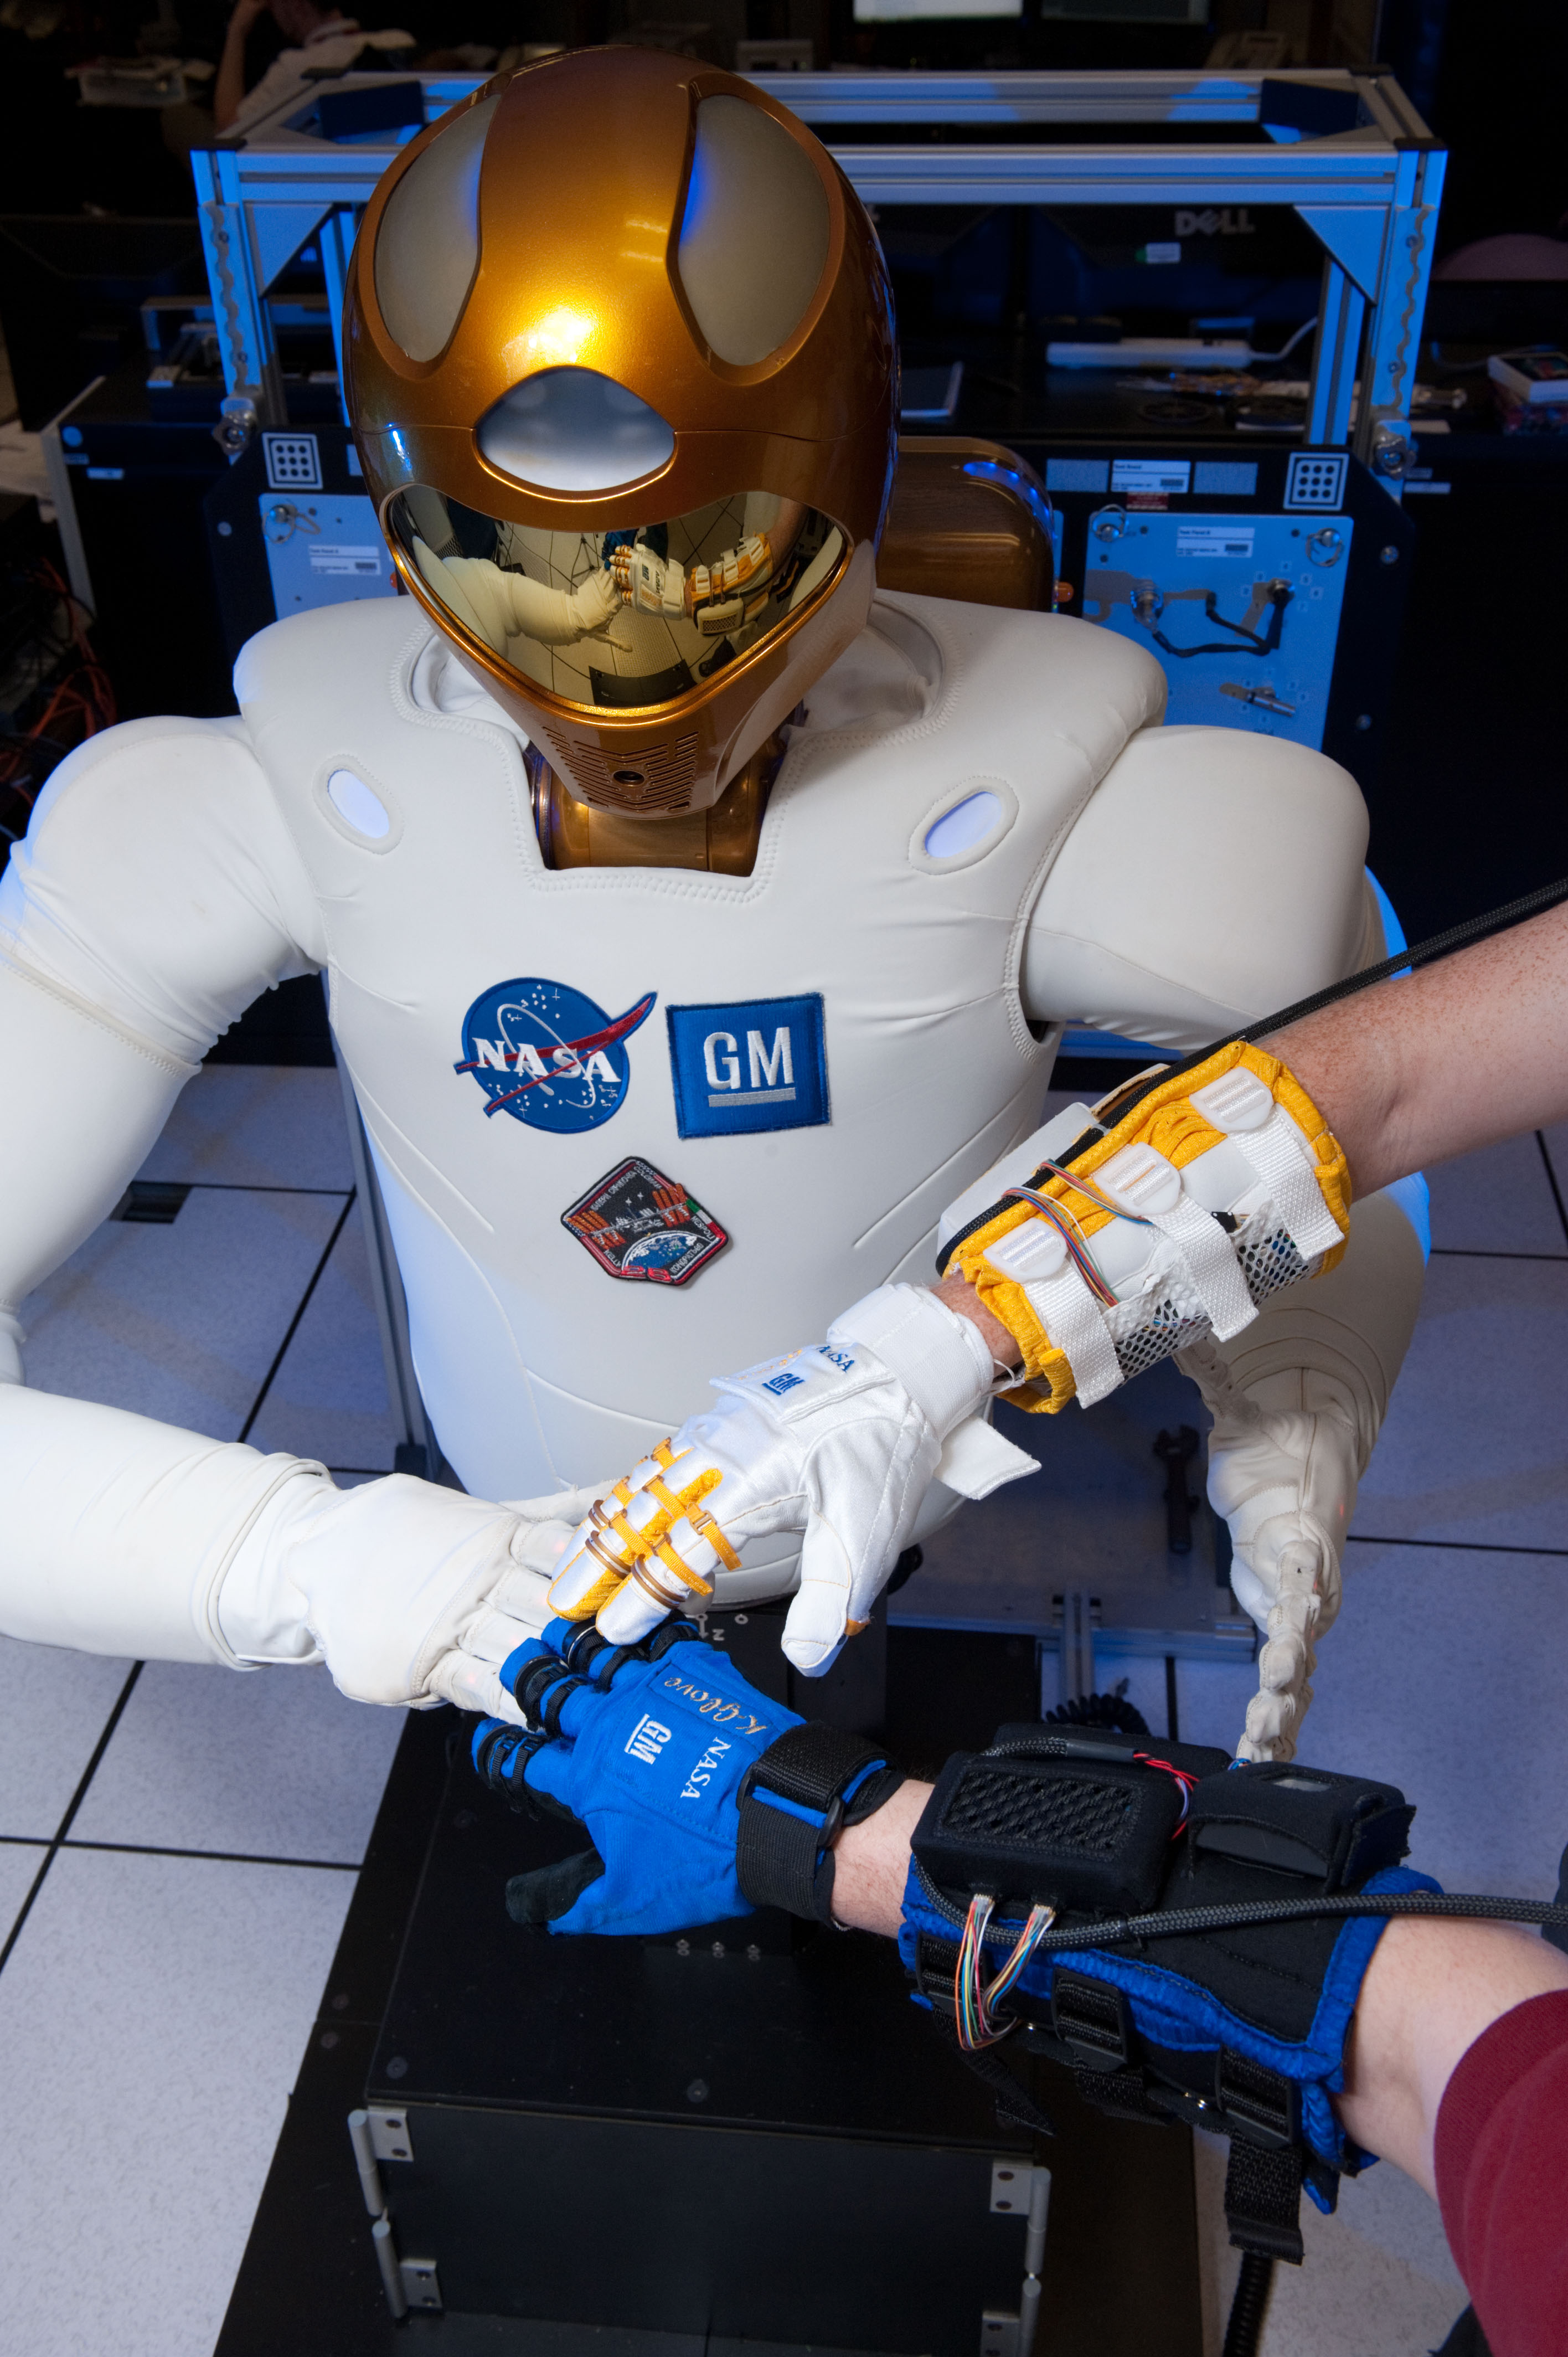 The new Human Grasp Assist device, or Robo-Glove, was built through the continuing partnership between NASA and General Motors. It uses Robonaut 2 technology to increase the strength of a human’s grasp.